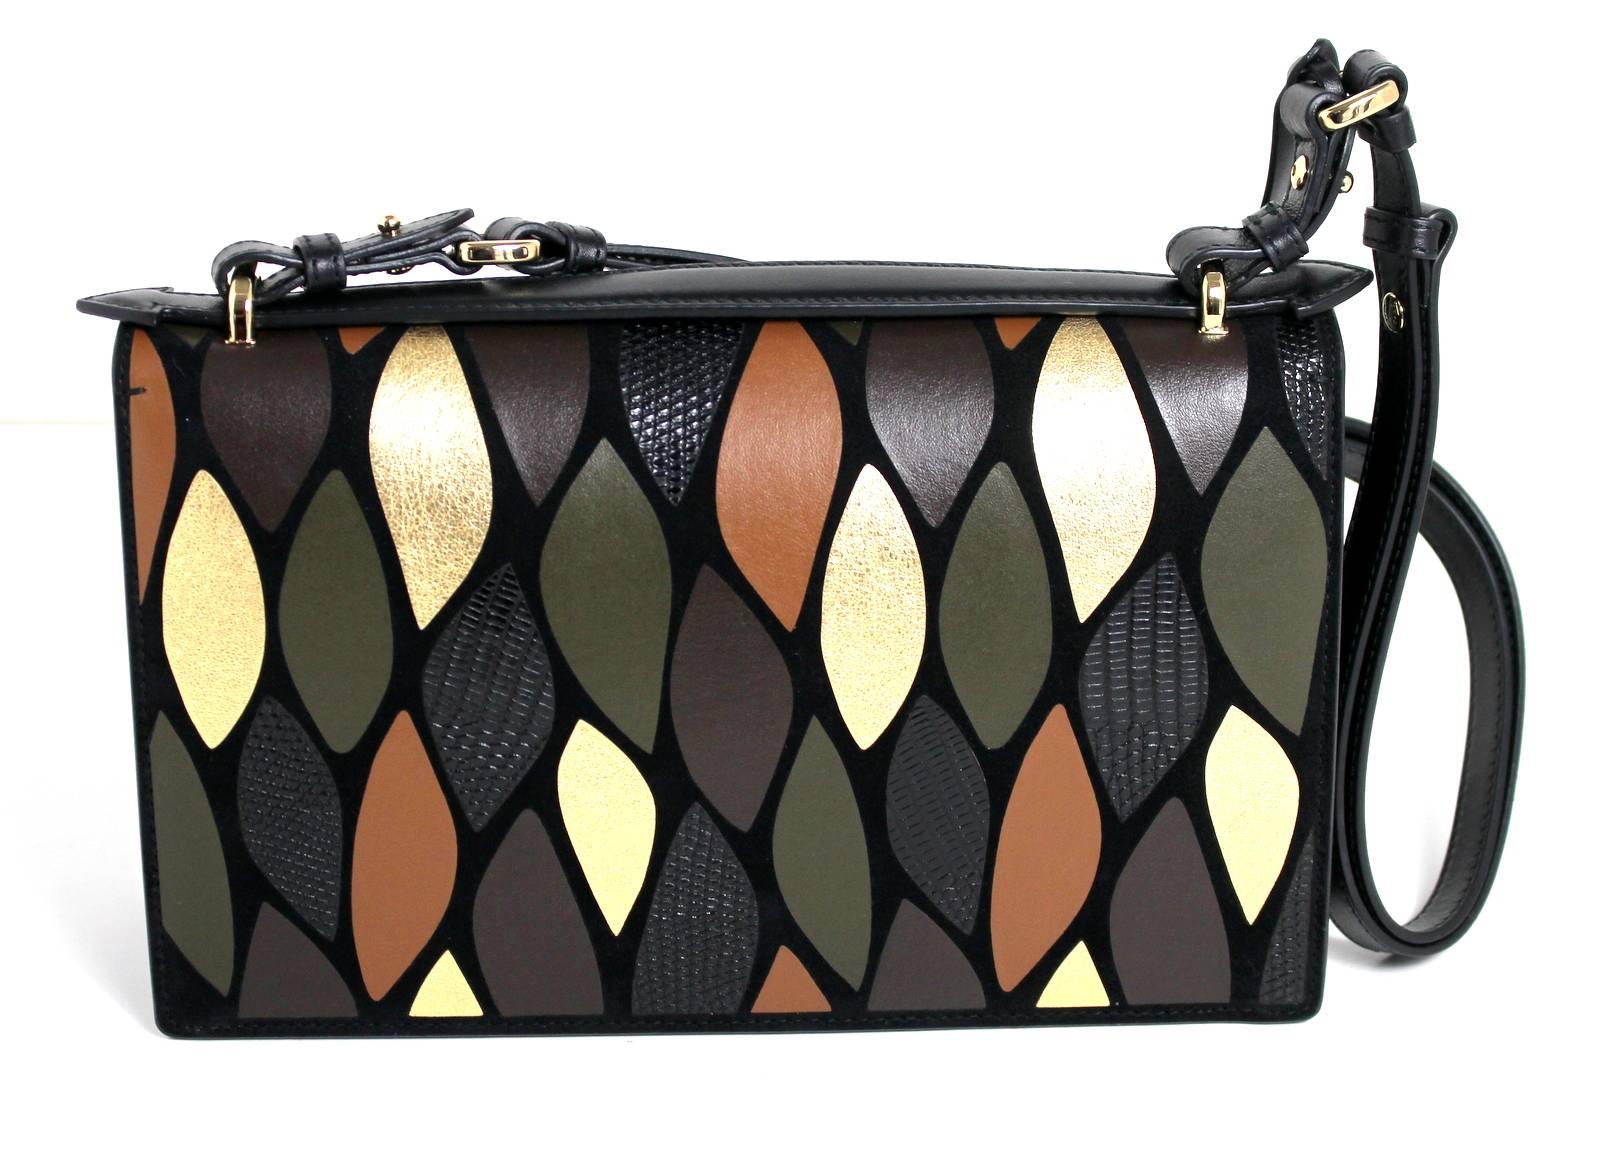 Salvatore Ferragamo Flap Bag Fall 2016- Retail $2,250.00
Multicolored and textured leaf mosaic. New; just released.  
Structured black leather flap bag is covered in a pretty leaf shaped mosaic.  Metallic gold, olive green, and shades of brown in